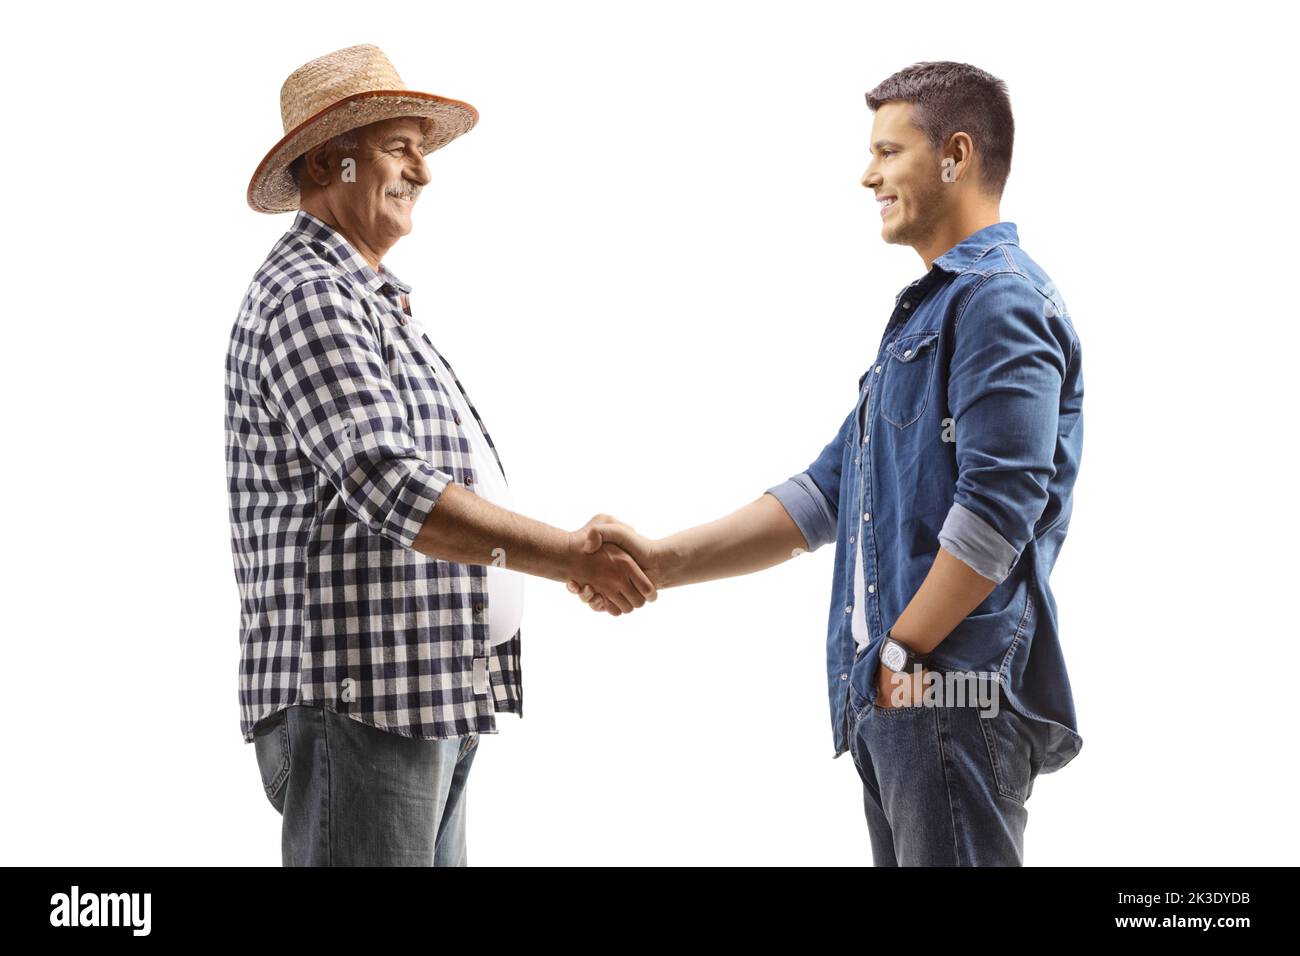 Mature farmer shaking hands with a young casual man isolated on white background Stock Photo